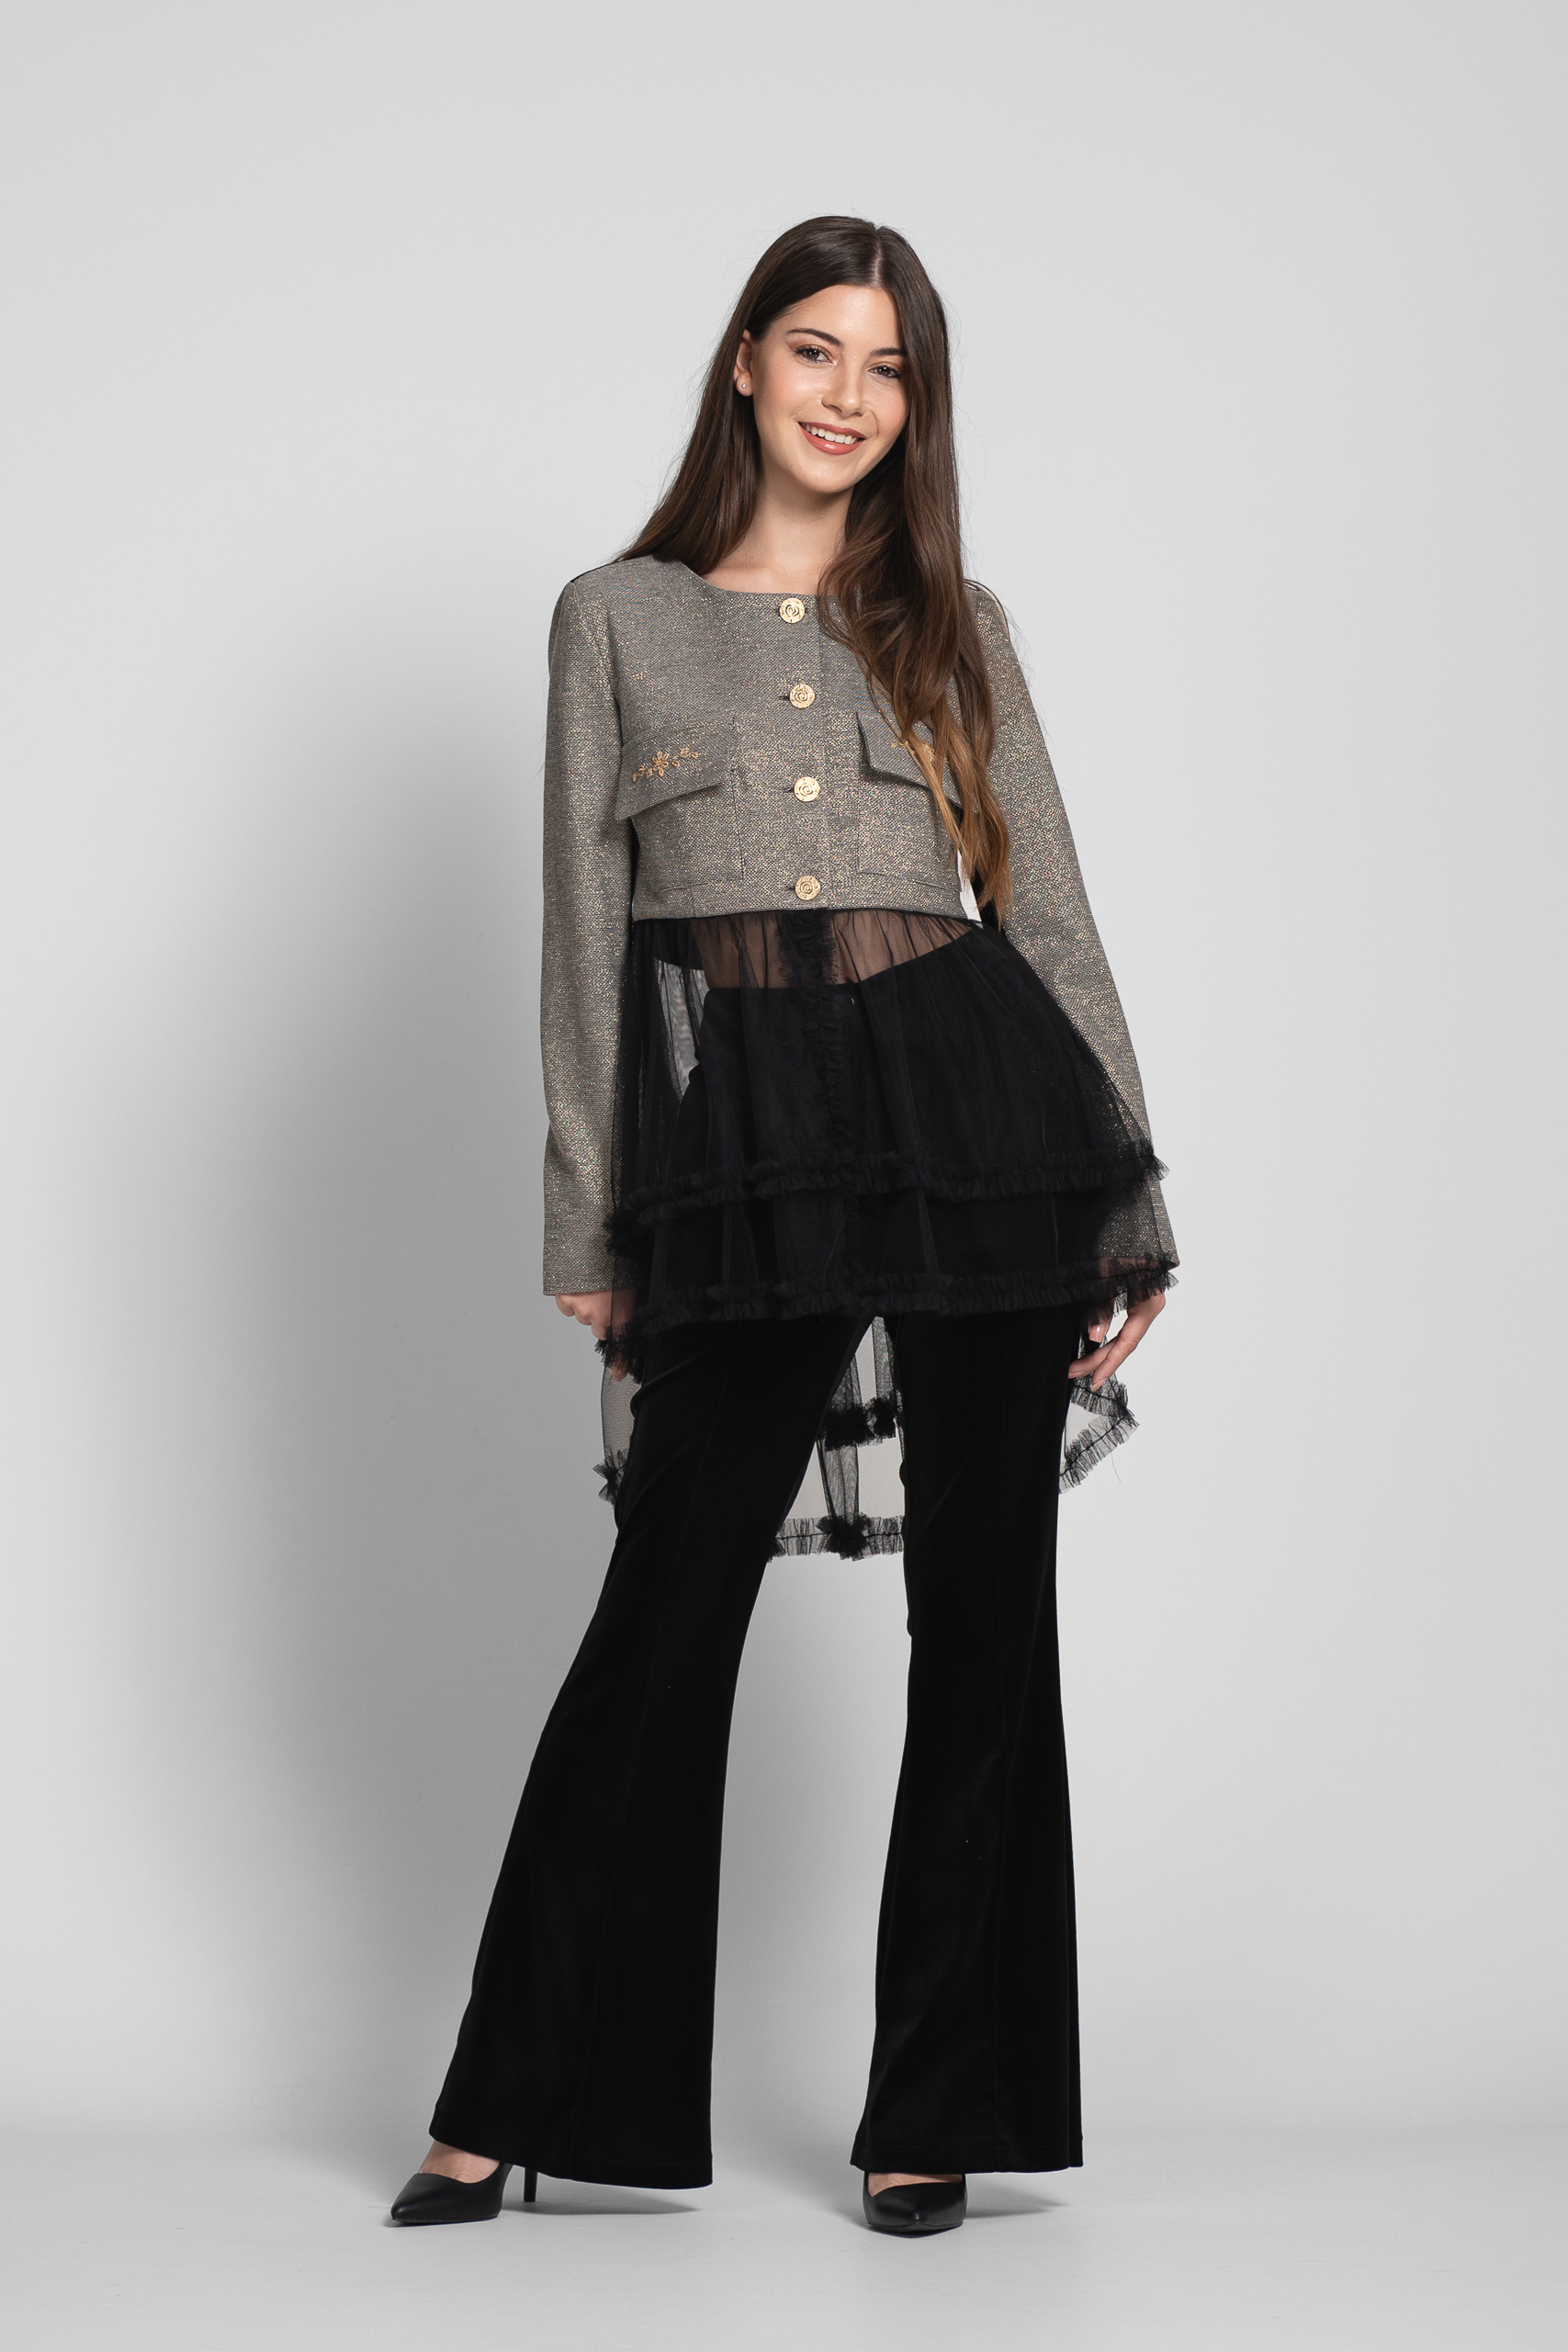 PERRY statement jacket in fabric with black tulle tail. Natural fabrics, original design, handmade embroidery